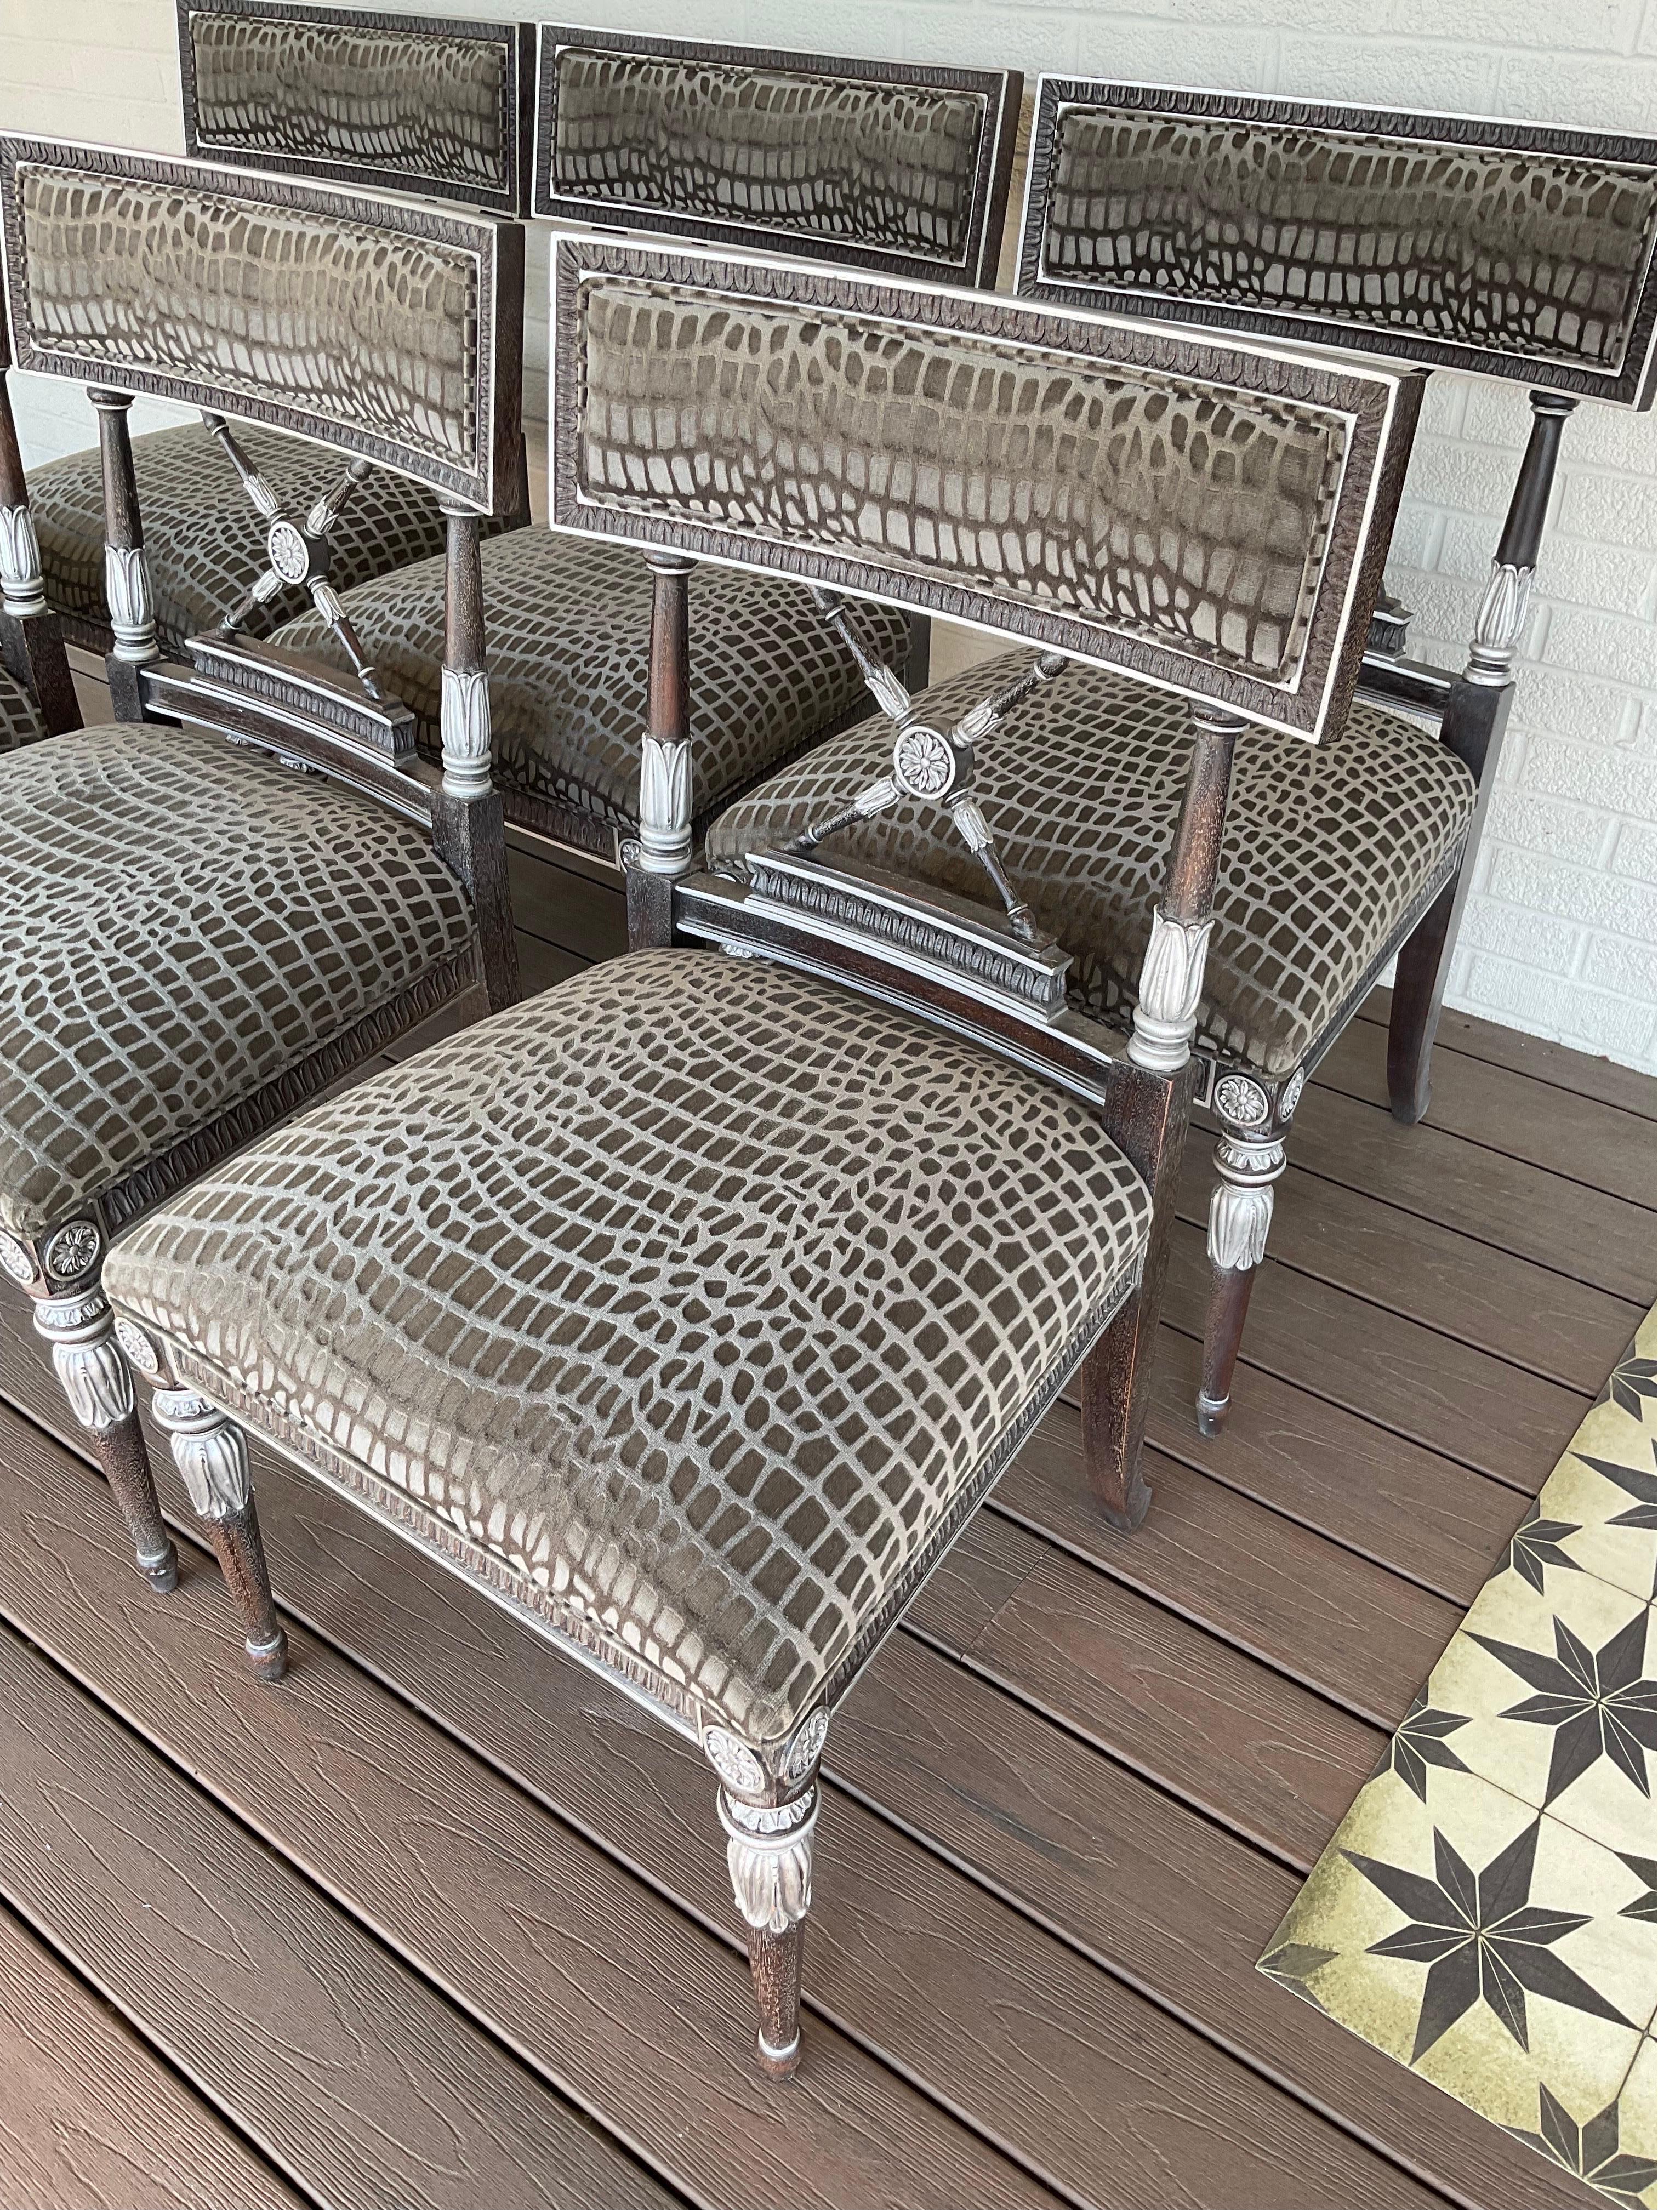 6 Neoclassical Gustavian Style Cerused Dining Chairs with Hand Carved and Silver Leaf accents. Circa 2009 by Hickory Chair. Original condition. Beautifully kept. Upholstery is in excellent useable condition.



Condition Disclosure:
Please